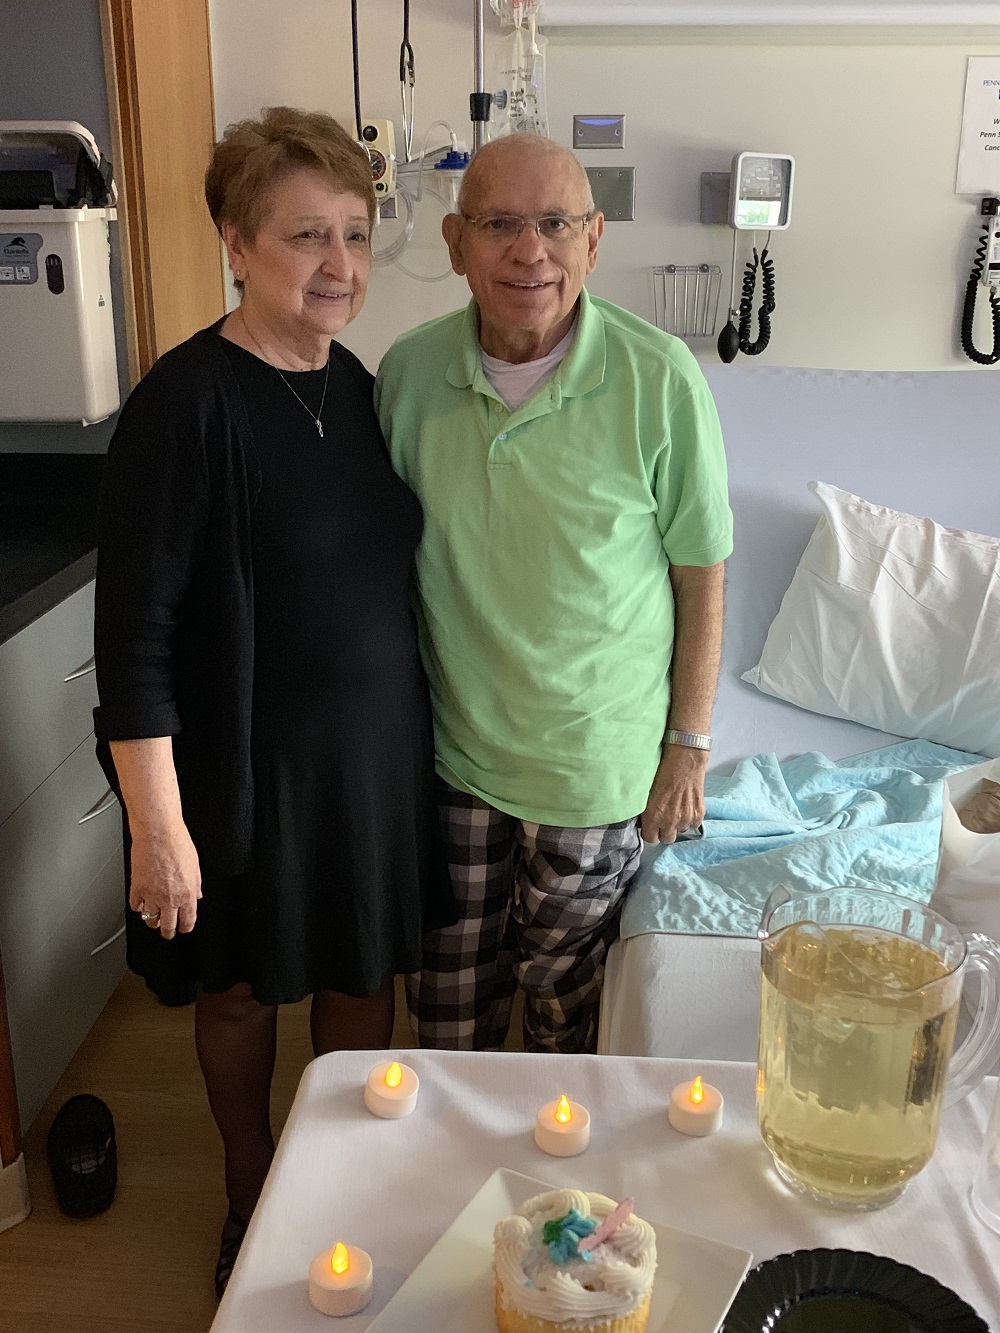 Bernadine and Charles Mineweaser stand in a hospital room with their arms around each other and smile. In front of them is a table with a cake, tea lights and a pitcher of sparkling grape juice. Next to Charles is a hospital bed, and equipment is behind them. Bernadine is wearing a dress, and Charles is wearing a polo shirt and plaid pajama pants.